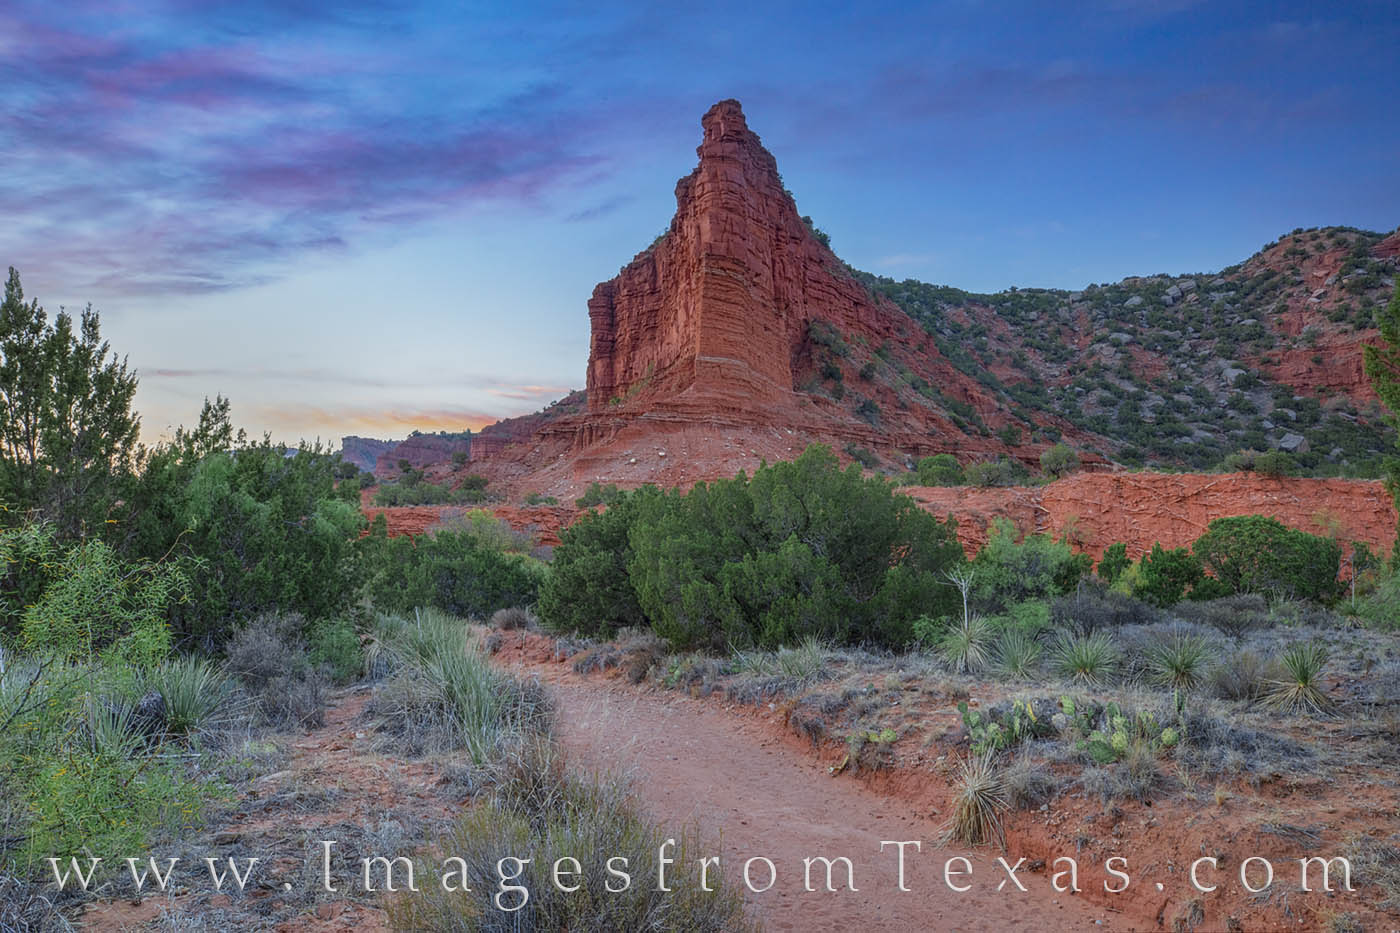 This sunset view comes from the South Prong Trail in Caprock Canyons State Park. The sky was quickly fading from pink to dark...